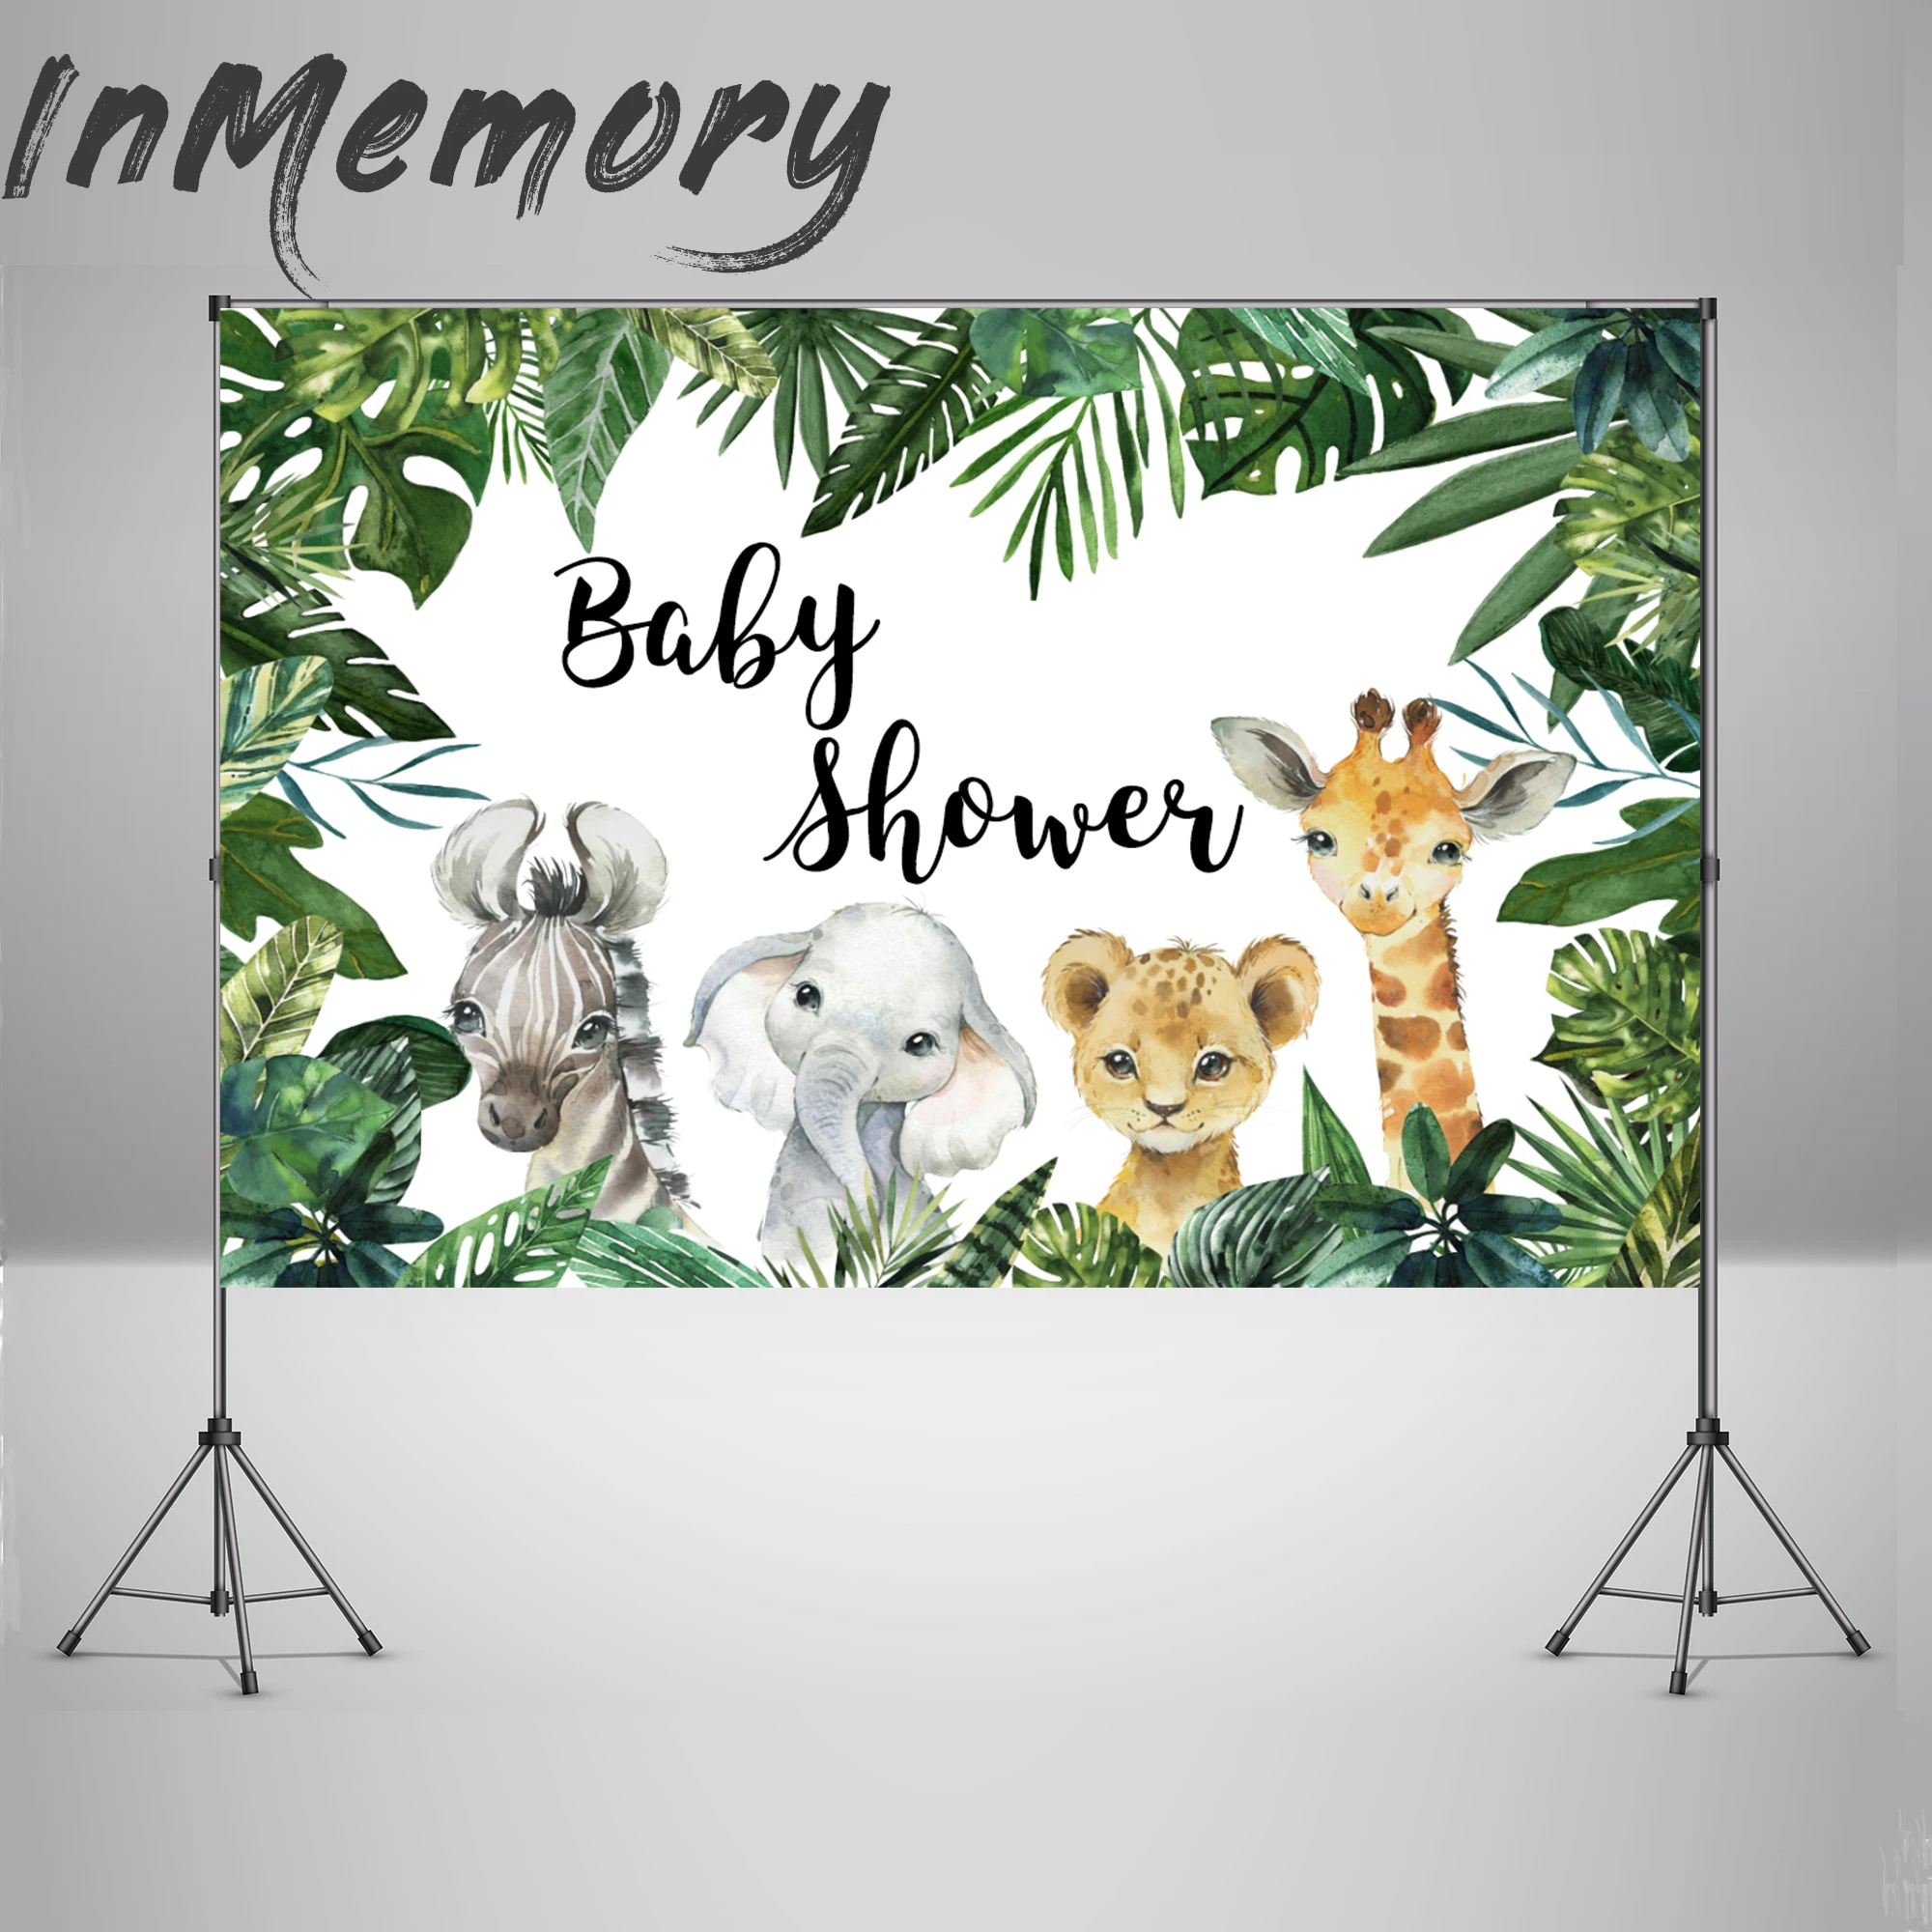 Yeele African Safari Theme Backdrop 10x8ft Kids Birthday Party Photography Background Baby Shower Child Portrait Acting Show Preschool Events Dessert Table Bday Party Photo Booth 